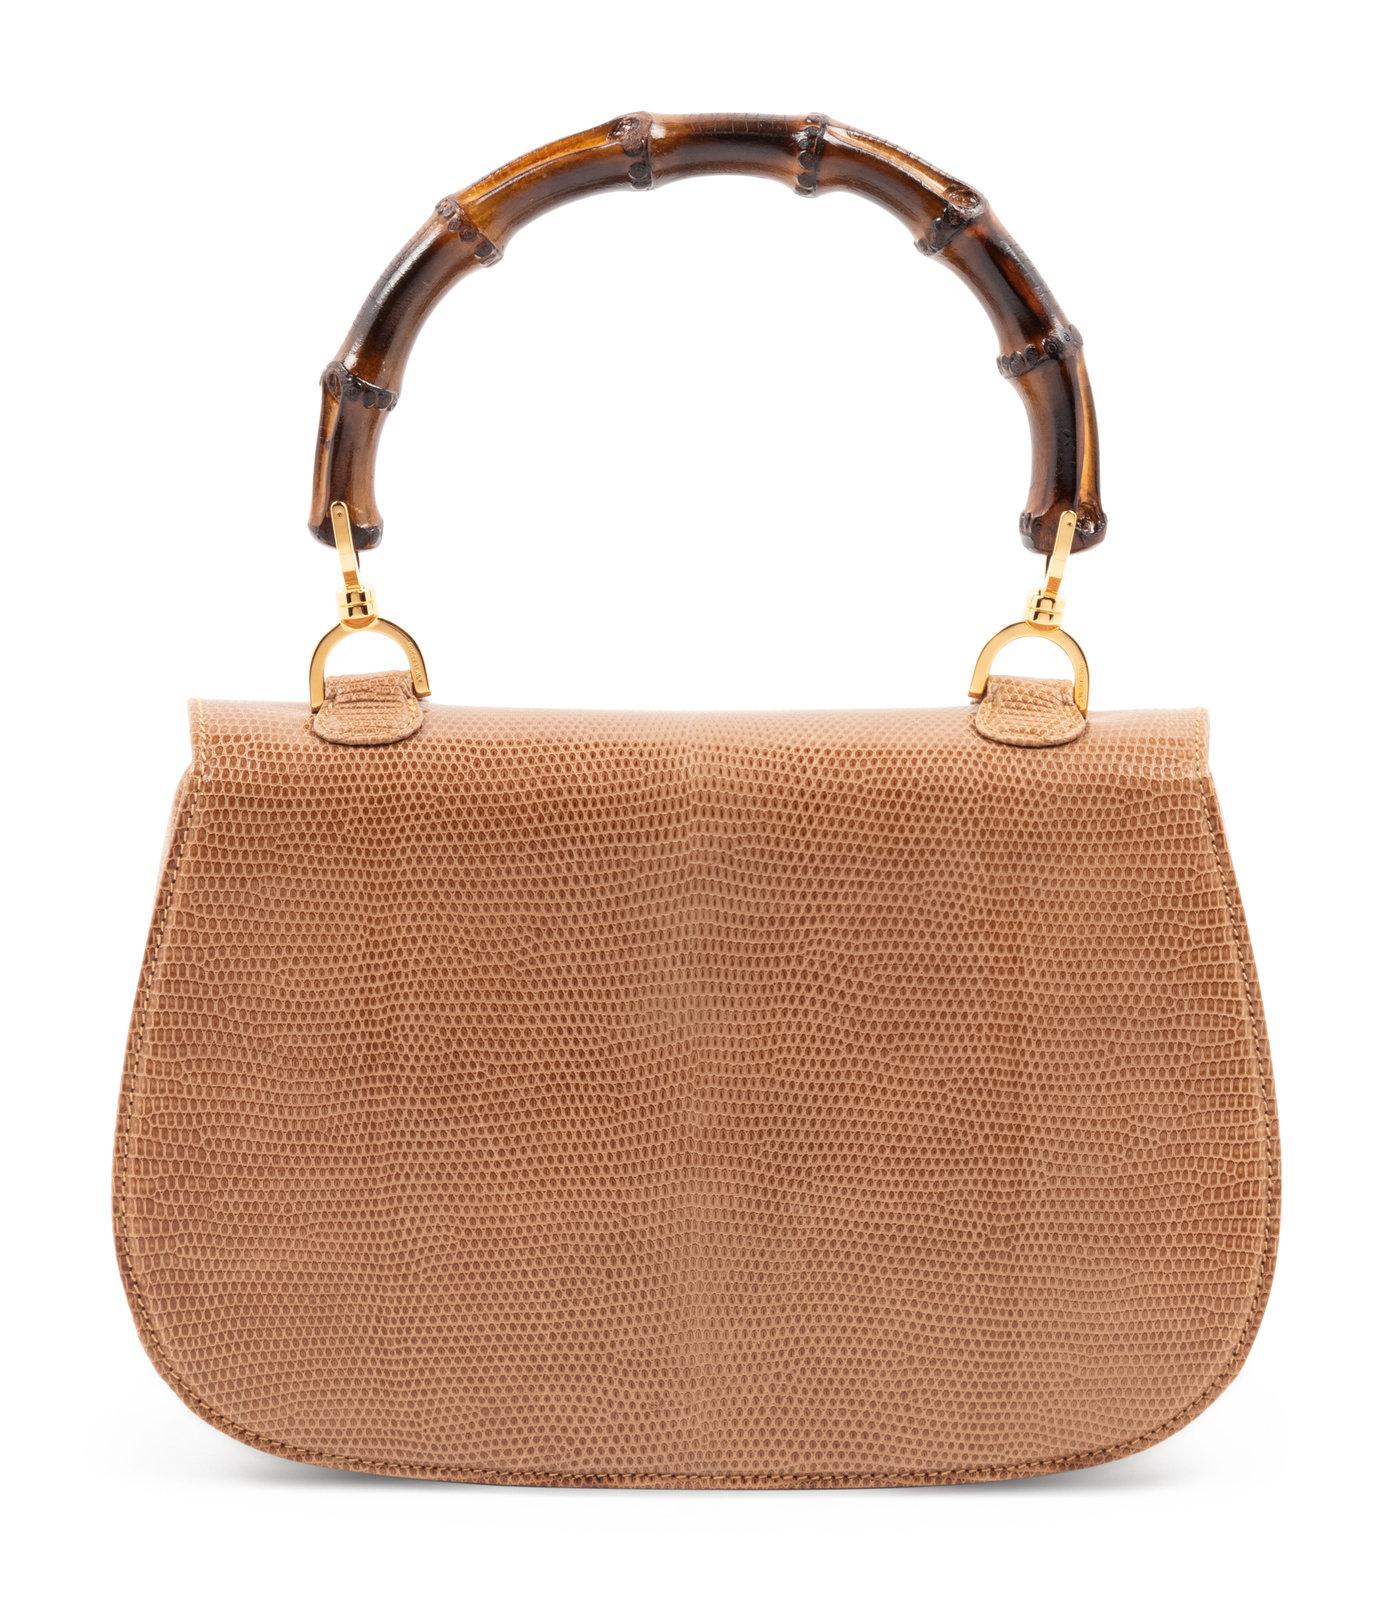 First introduced in the early 1940's, the Gucci bamboo bag came into production as materials around Europe became scarce. Bamboo, which could still be abundantly sourced from Japan, was used under the influence of heat by Gucci craftsmen in a way